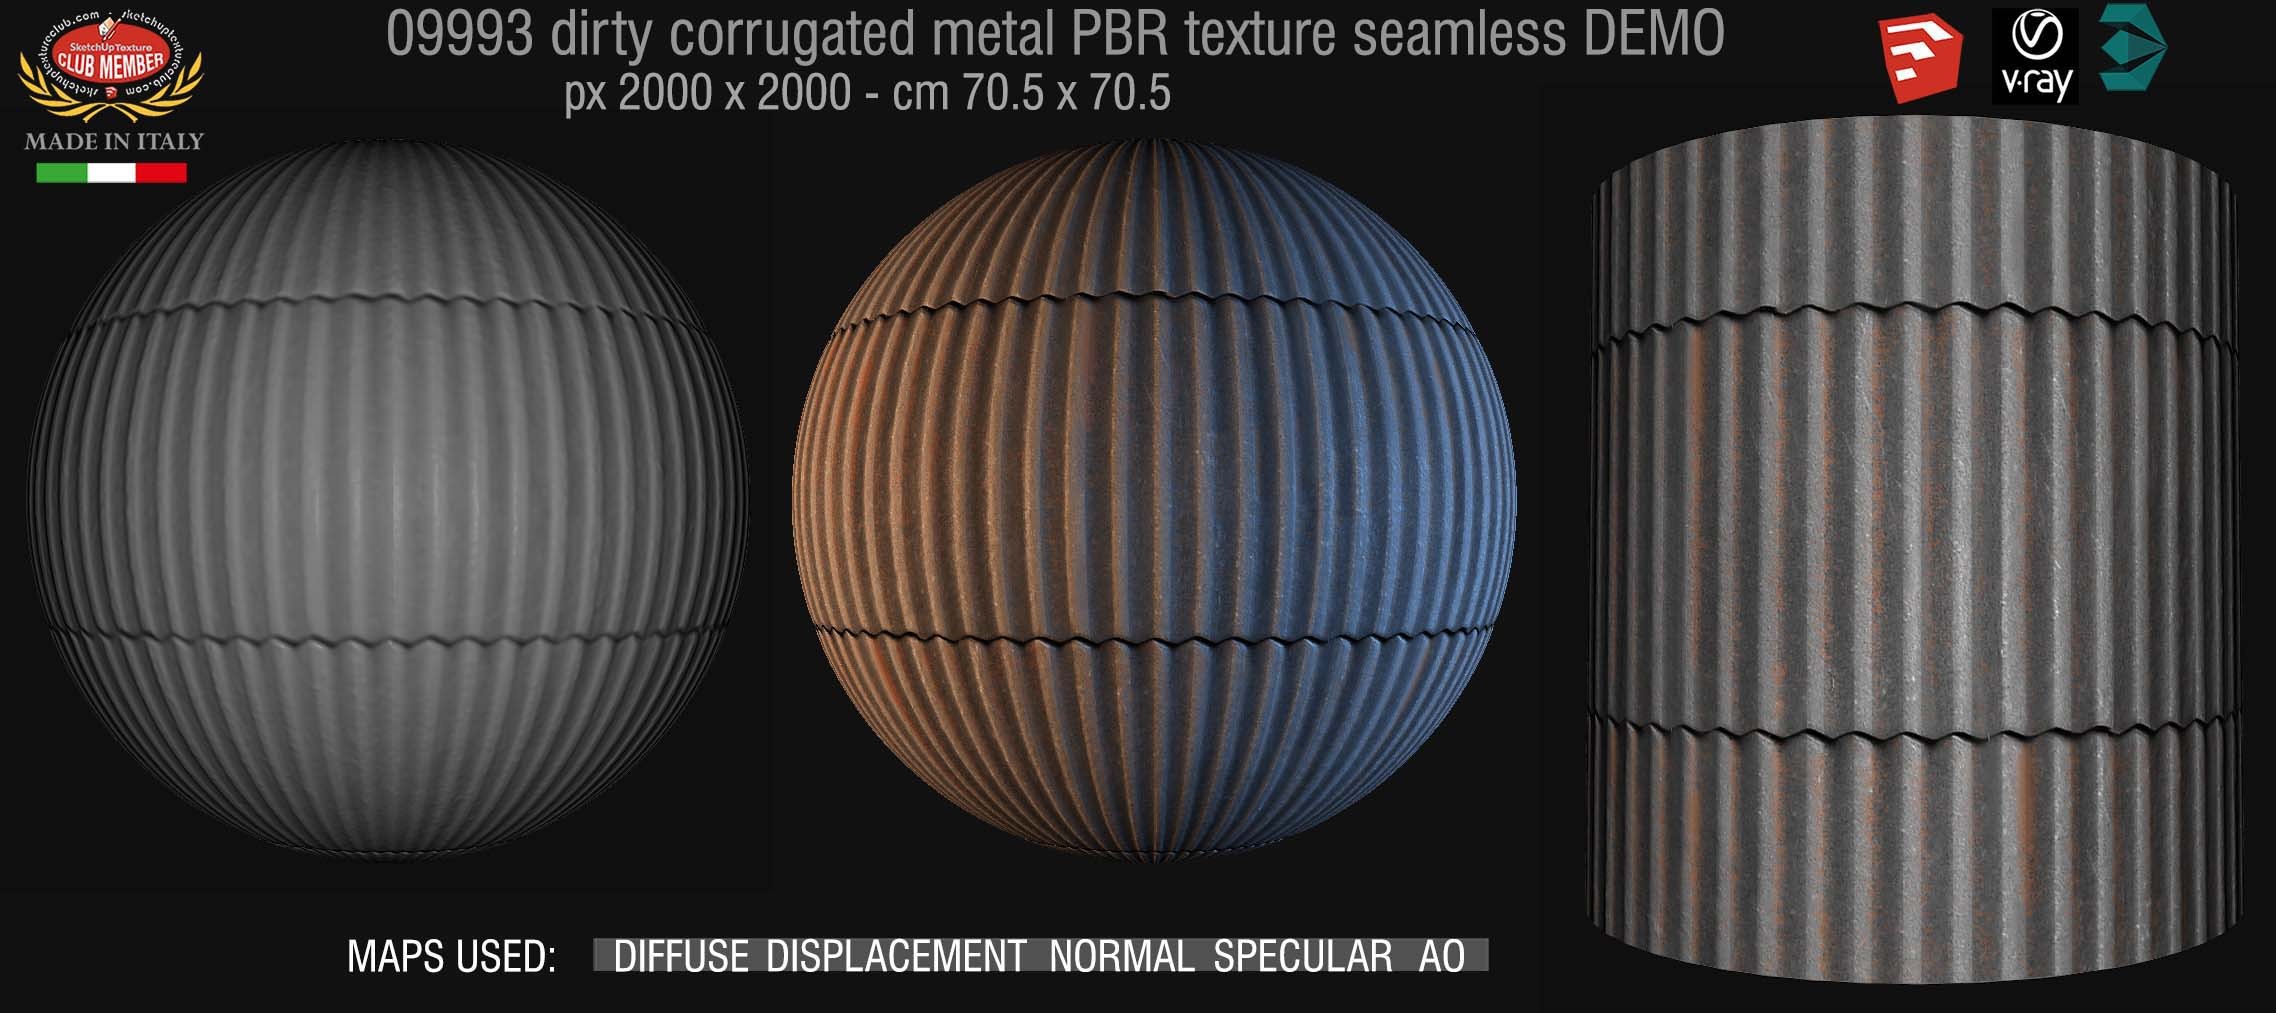 09993 Dirty corrugated metal PBR texture seamless DEMO